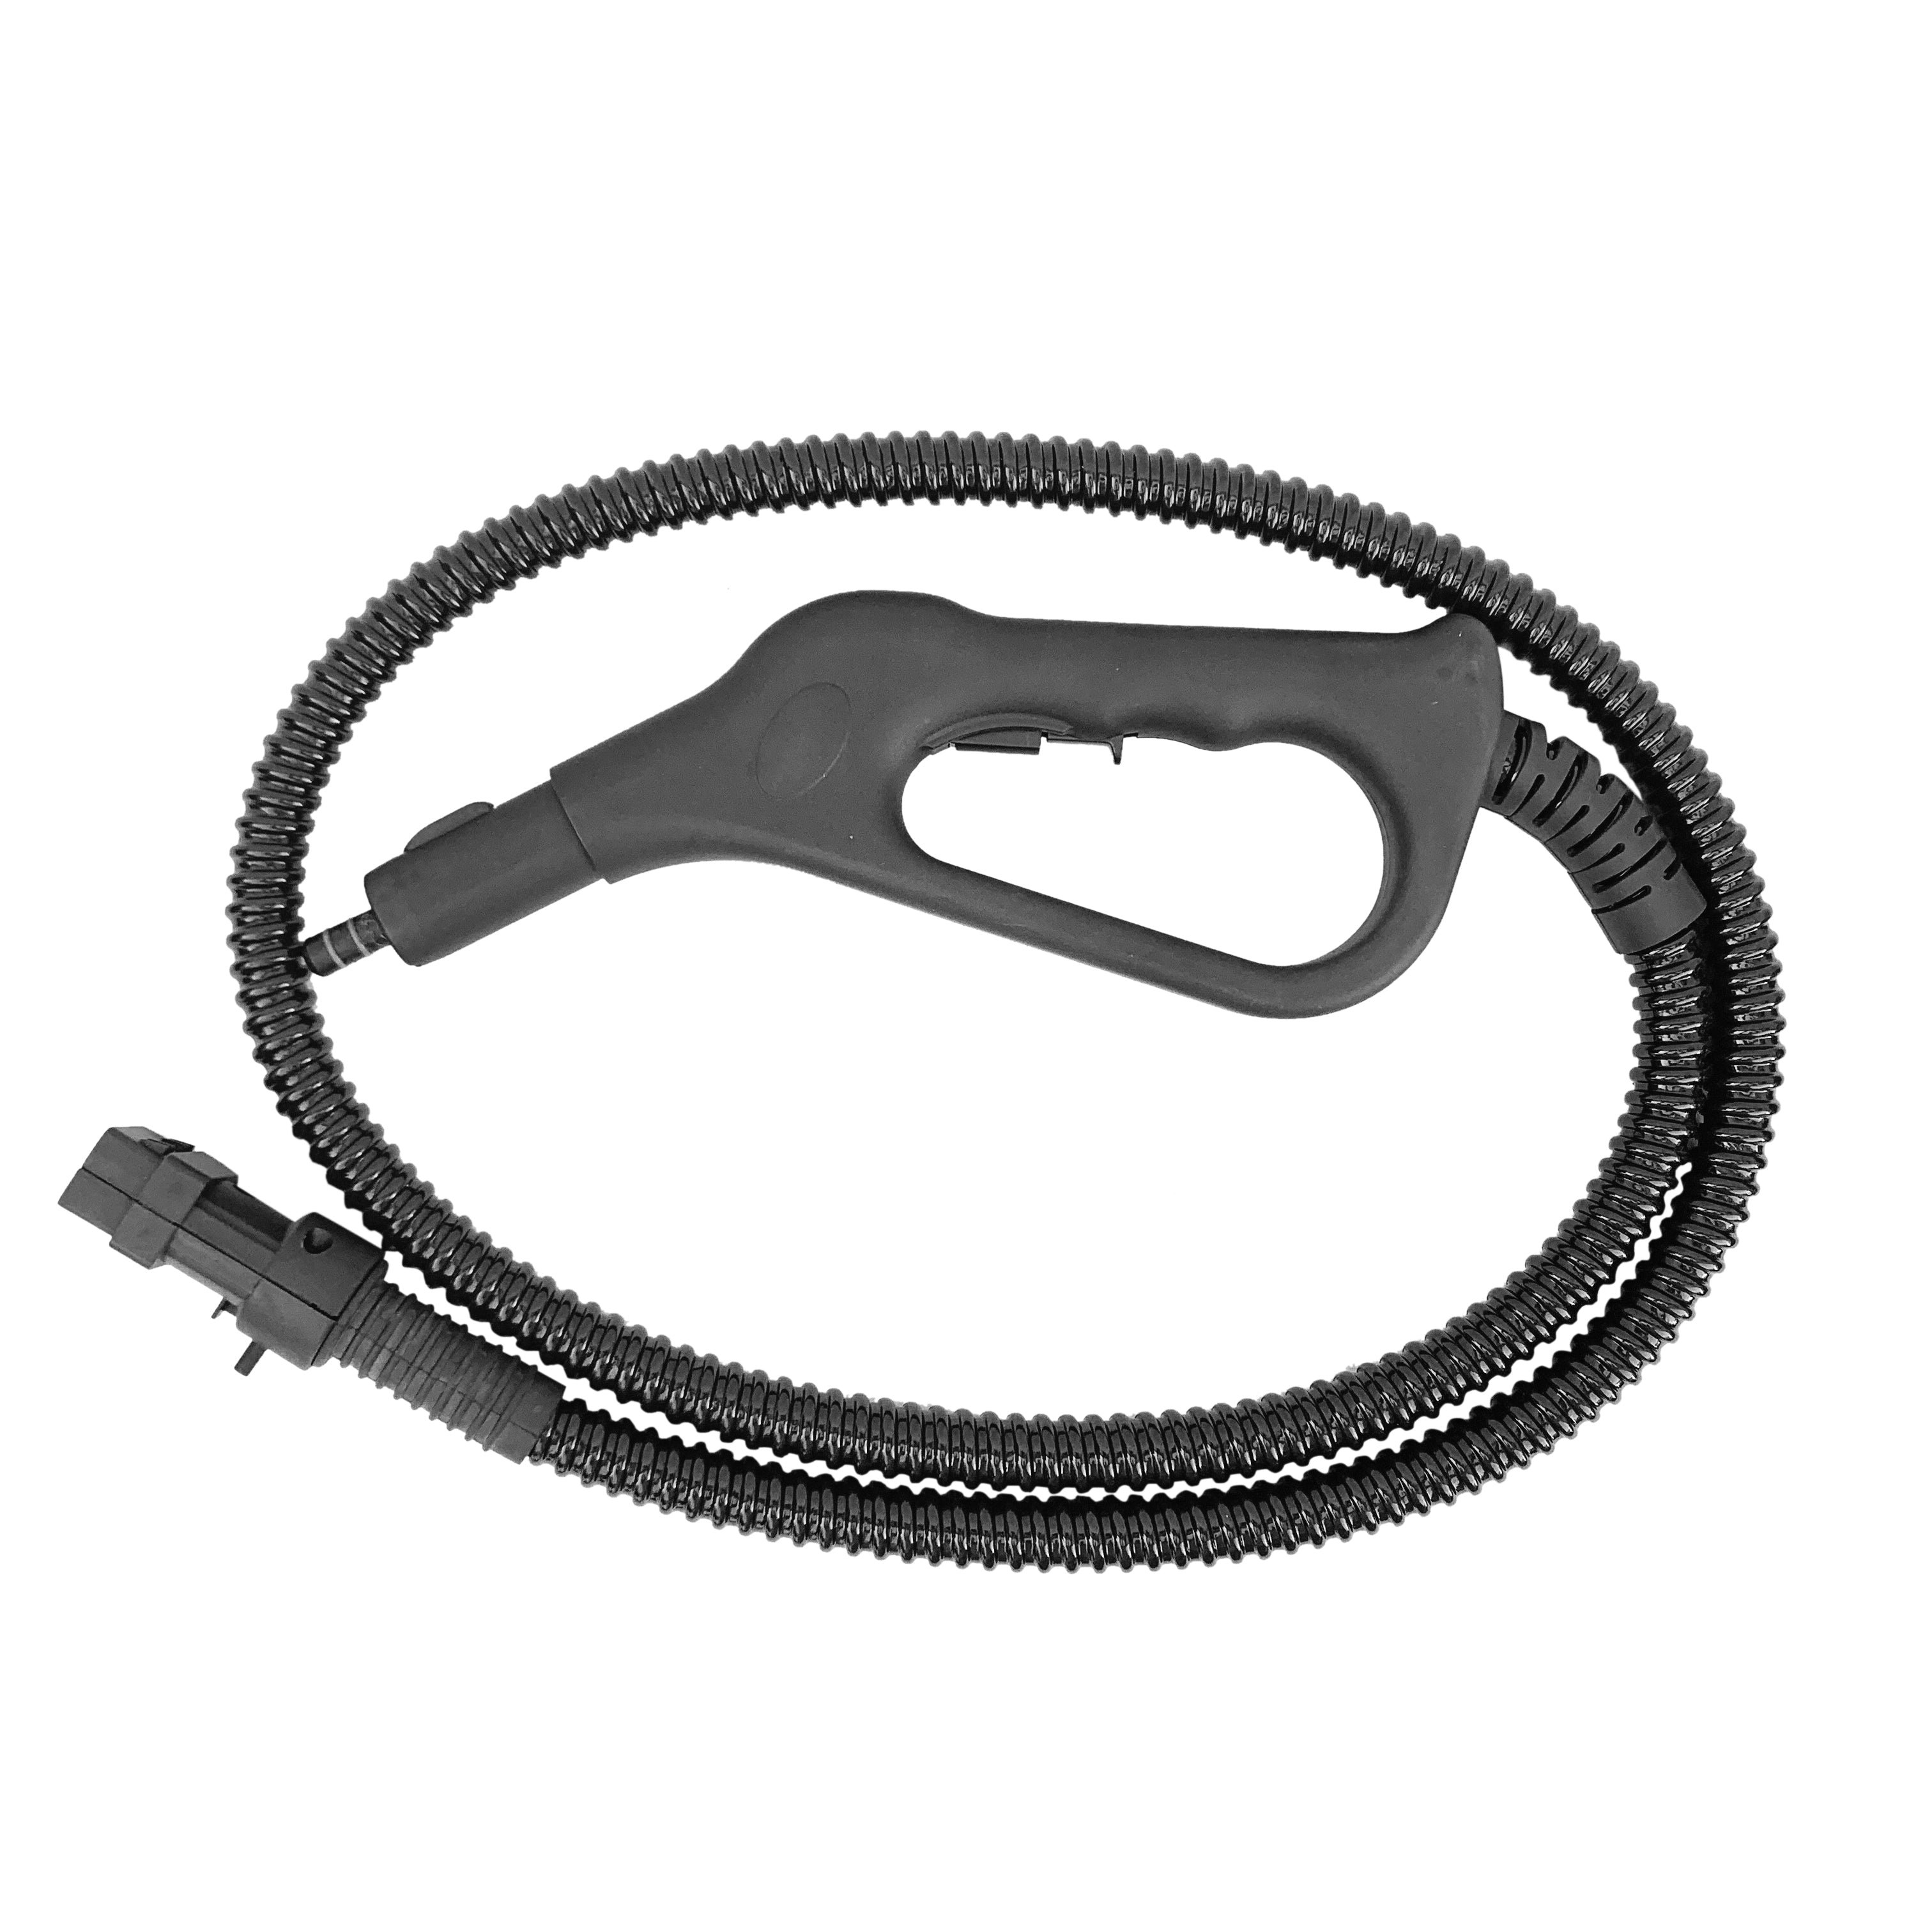 Replacement Hose and Trigger gun for Aqua Pro Steamer